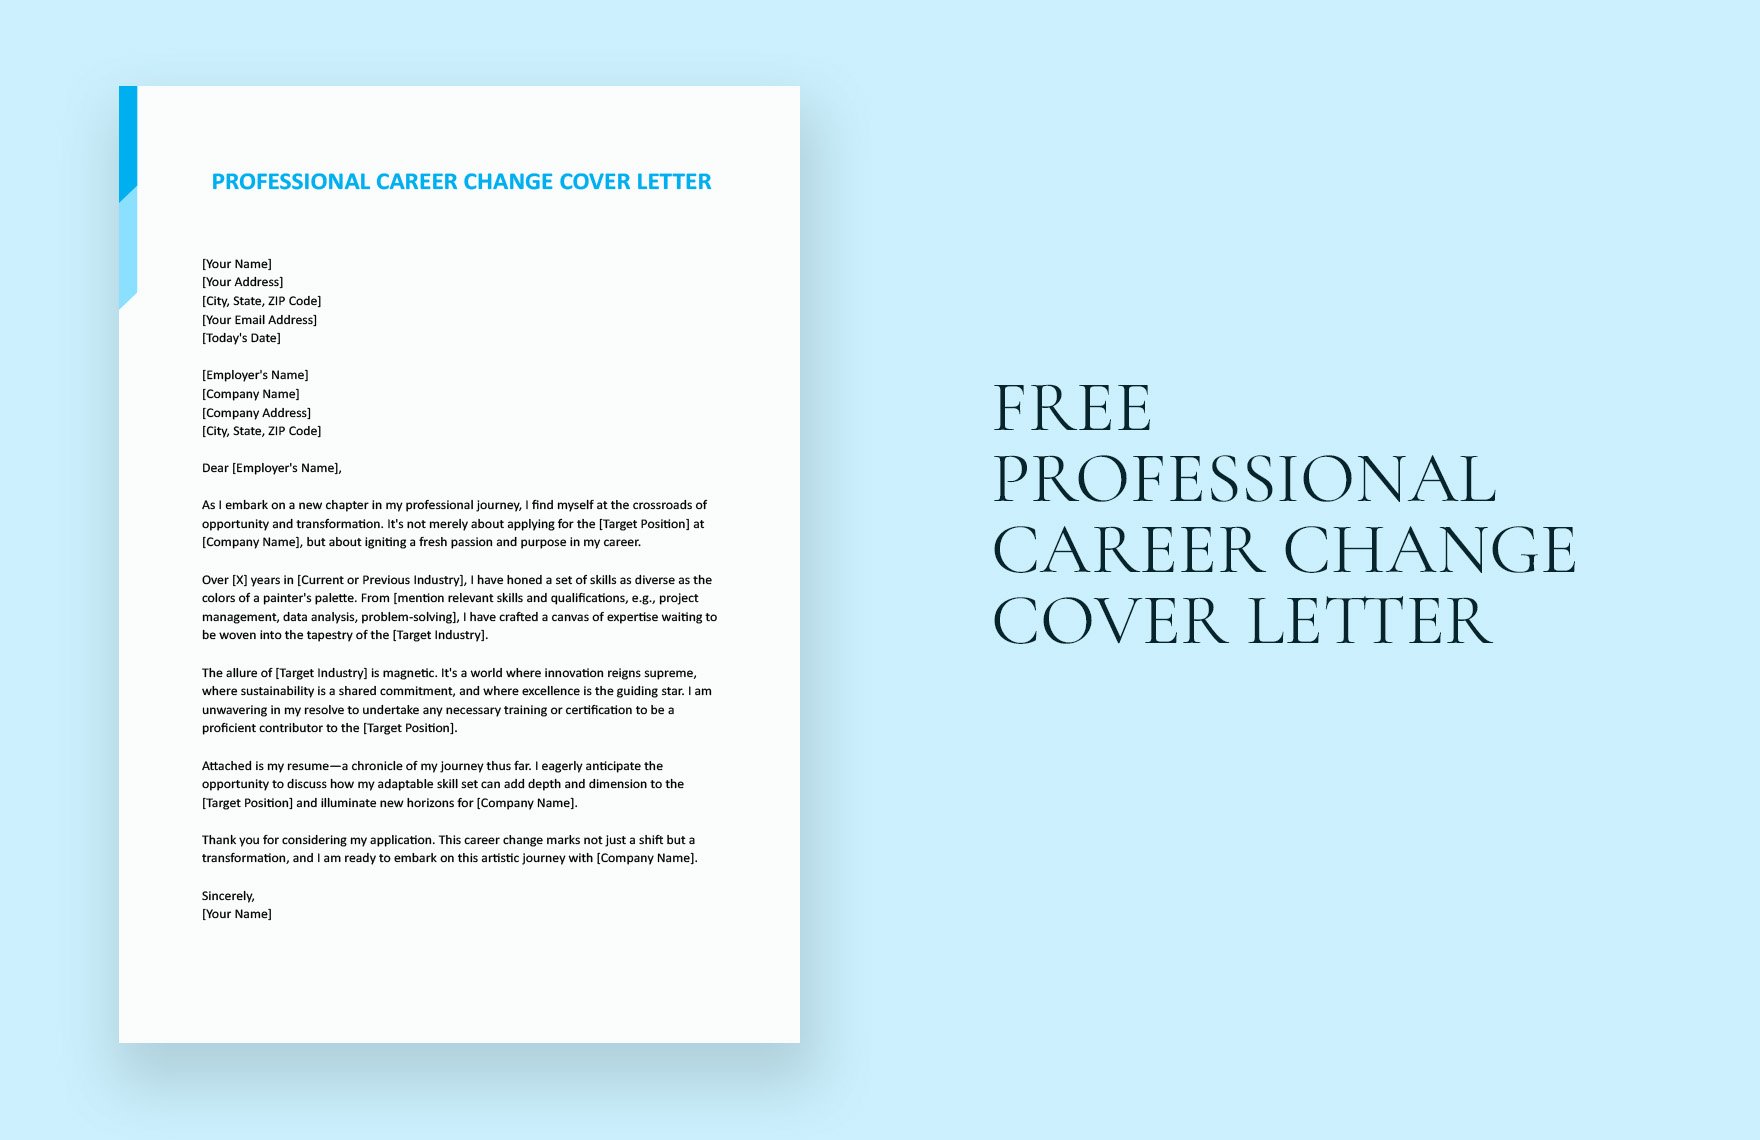 Professional Career Change Cover Letter